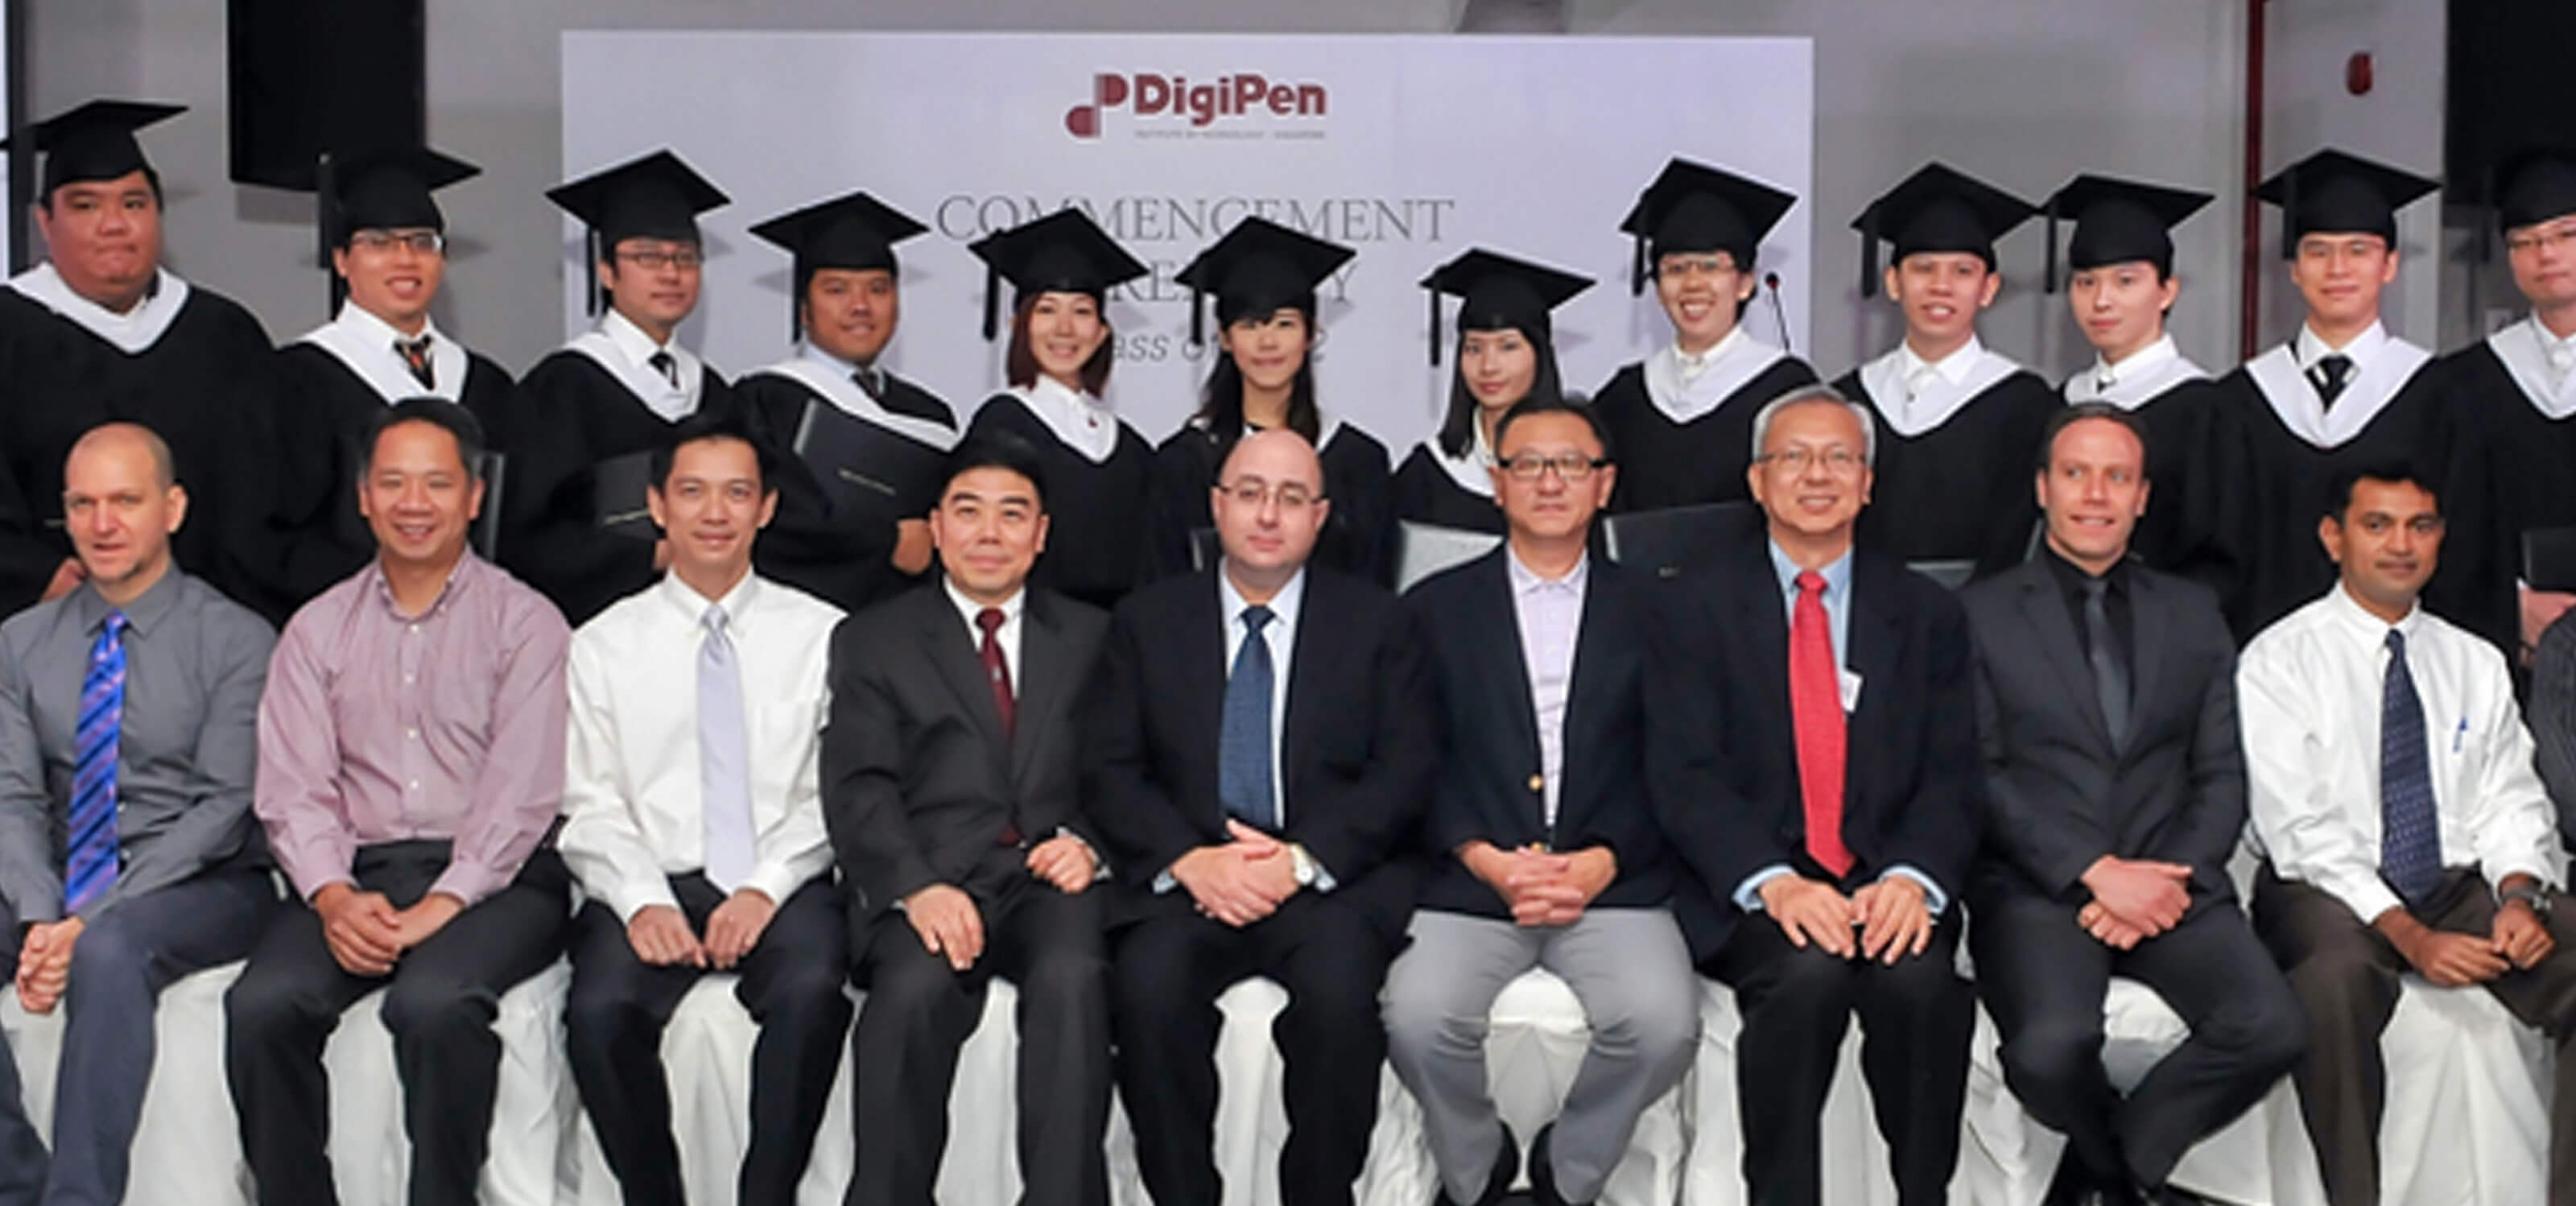 12 DigiPen (Singapore) graduates of the inaugural class pose in cap and gowns behind seated faculty and administration